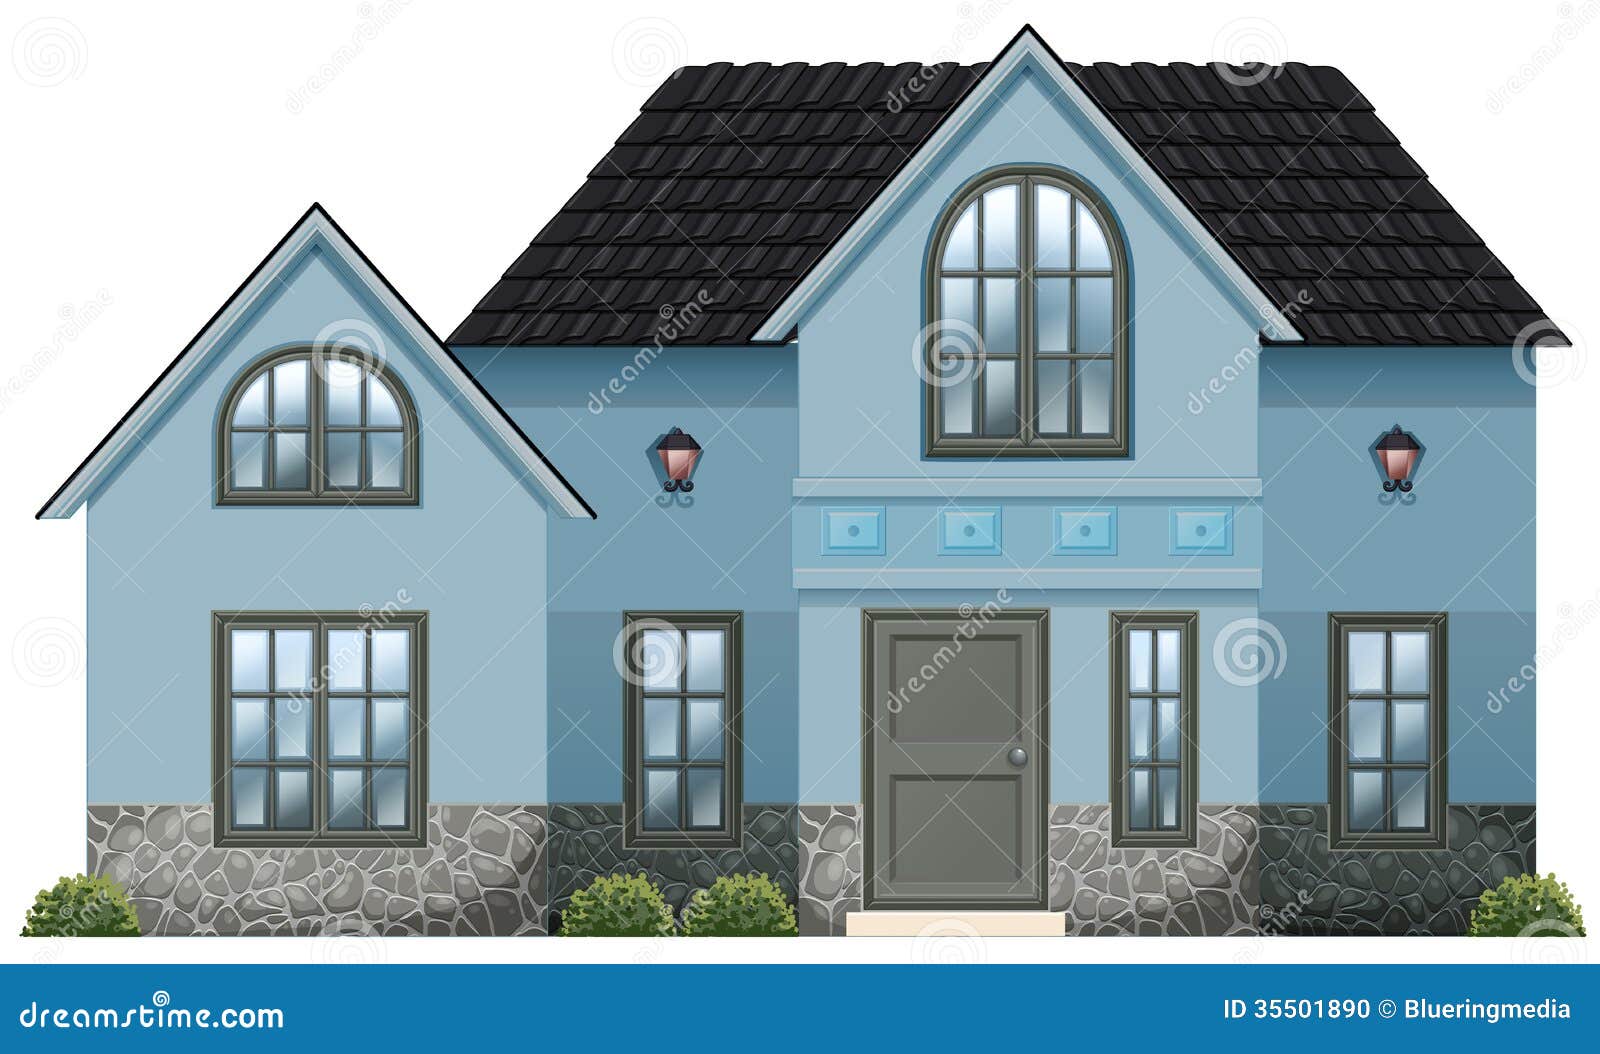 huge house clipart - photo #48